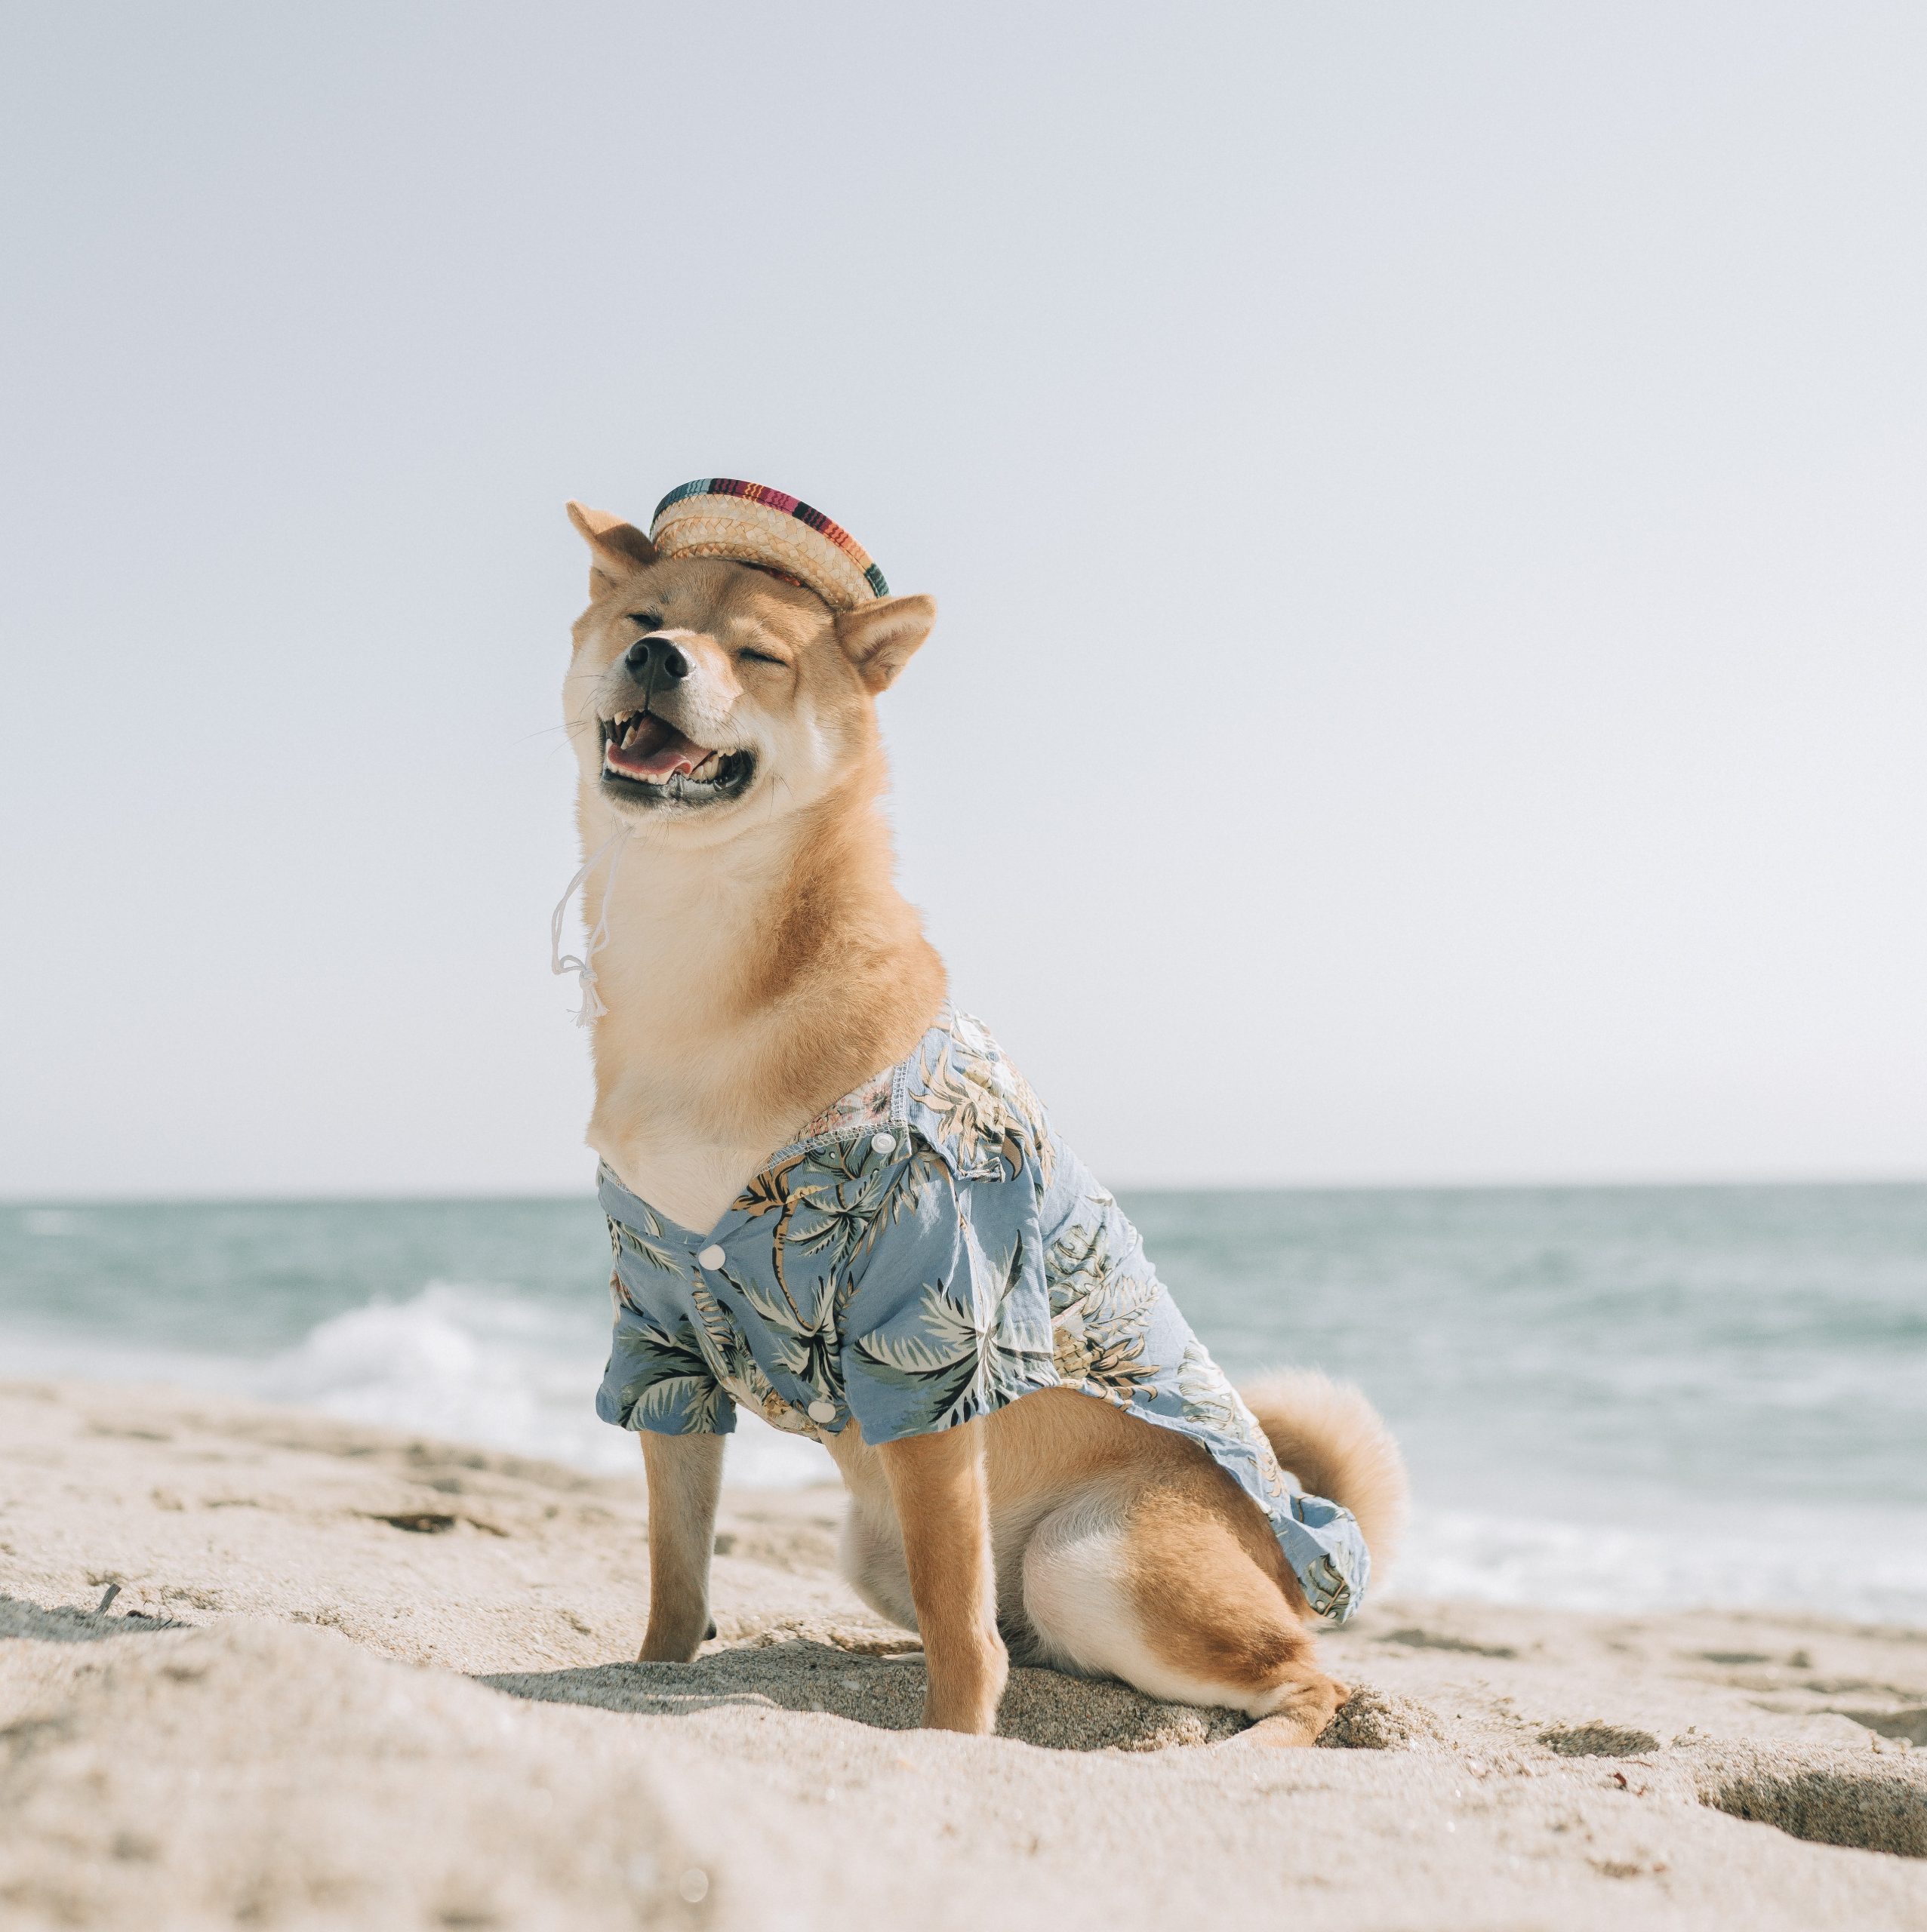 Protect Your Pooch From Sun’s Harmful Rays